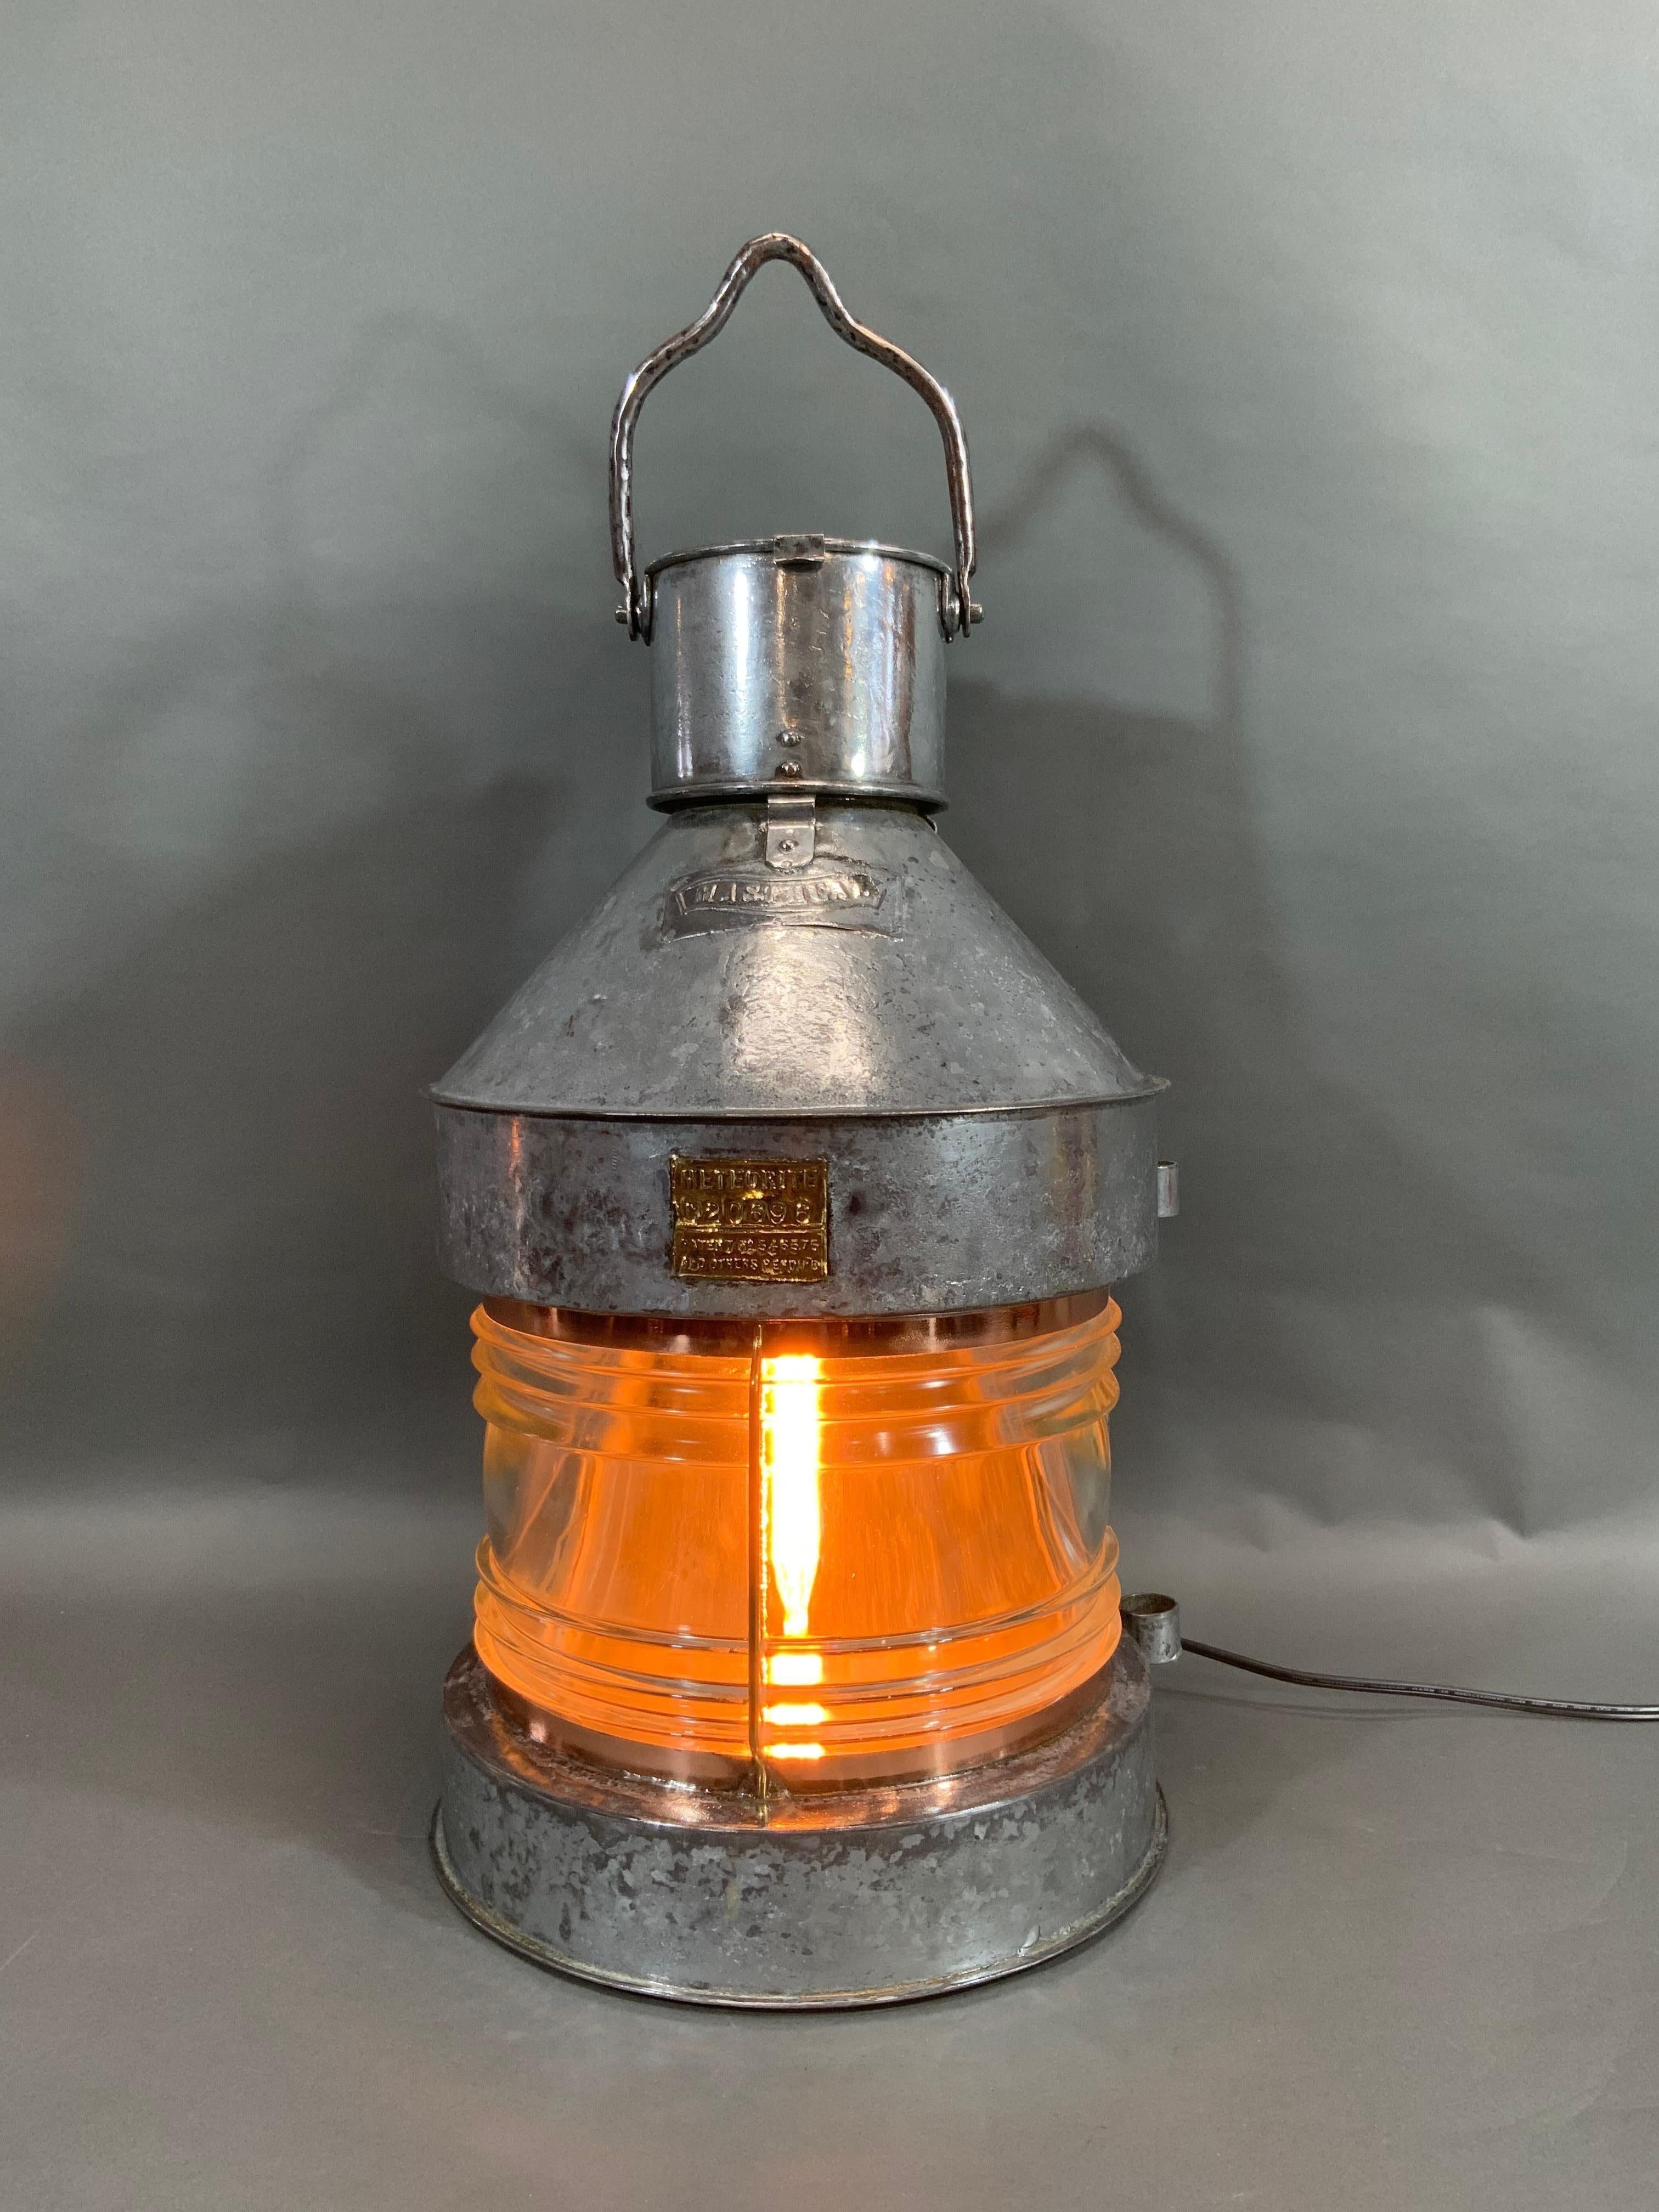 Awesome antique ship's masthead lantern with Fresnel glass lens. Hinged and vented top. Brass makers badge with serial number C20696 from English Maker Meteorite. Sturdy hoisting handle. Circa 1925. Wired for home use.

Overall Dimensions: 23